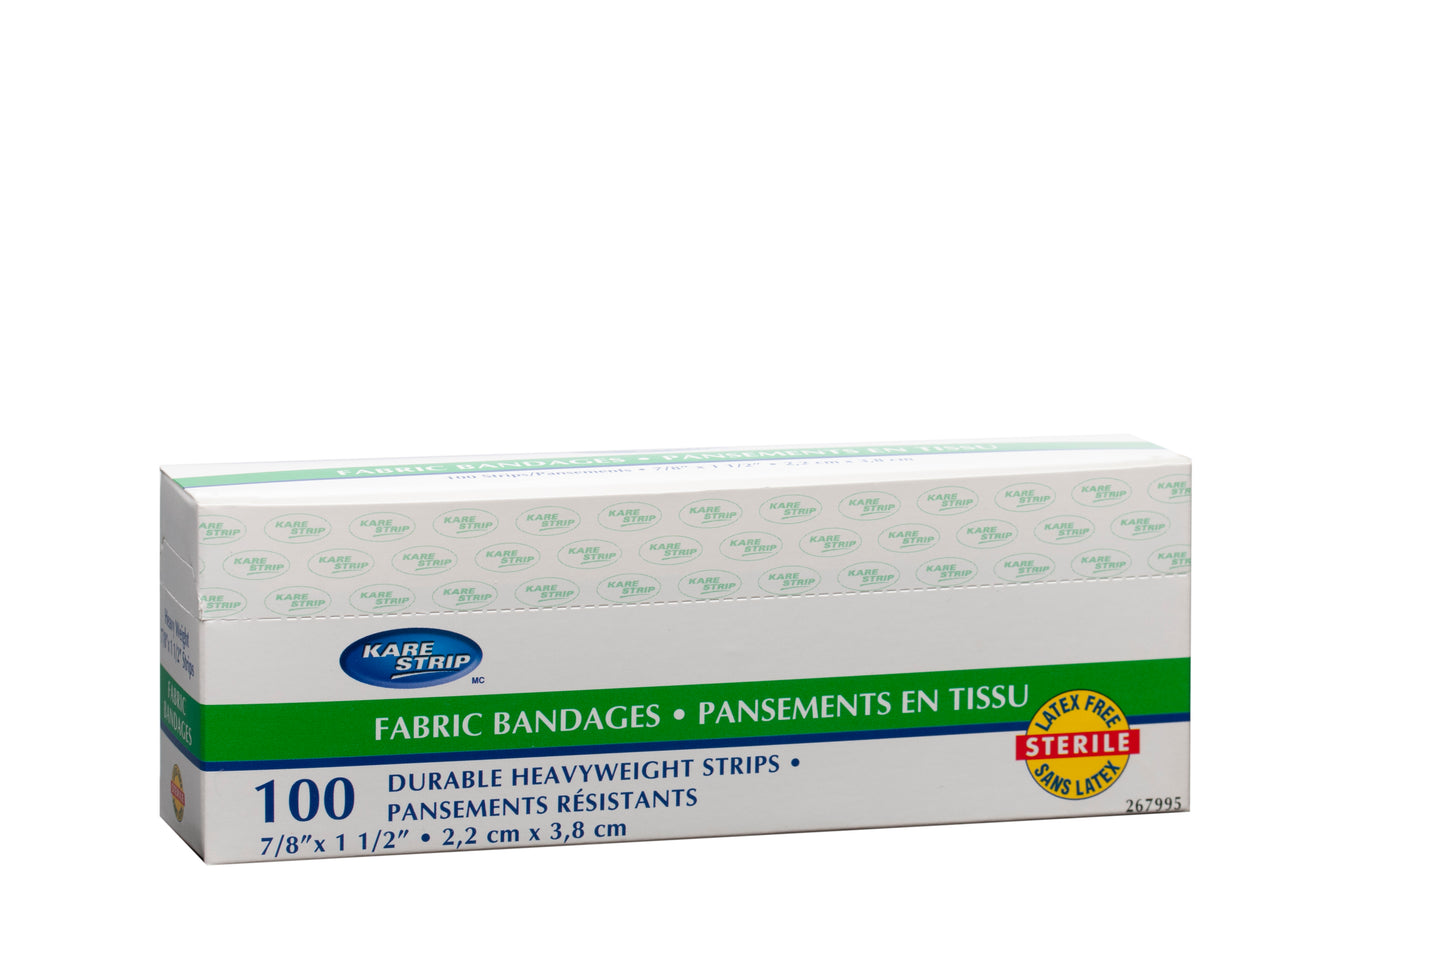 Kare Strip™ Tough Fabric Adhesive Bandage Strip - 3.8 x 2.2 cm - Latex-Free - Box of 100 - Ideal for Professional and Industrial Use